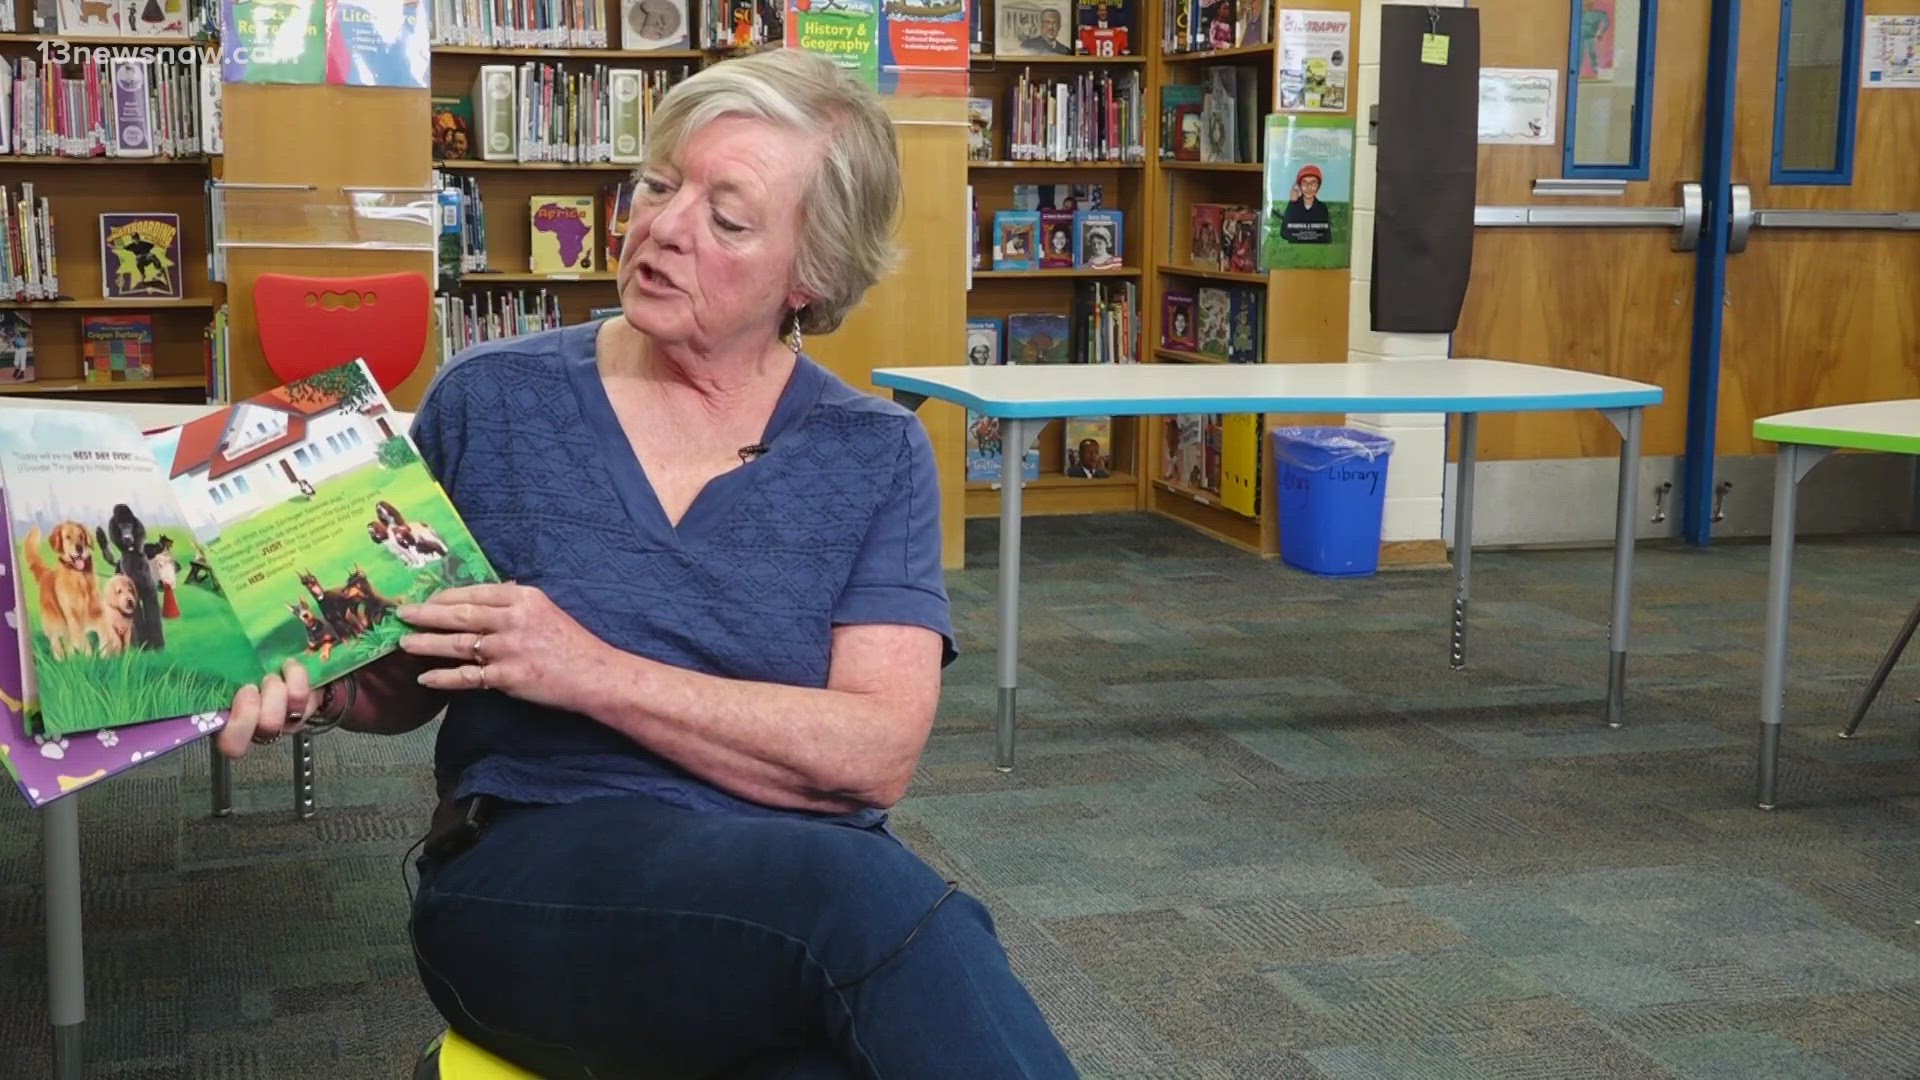 Retired Rosemont Elementary Annesley Hackathorn wrote a book about her first dog, "Shenleigh O'Doodle: Half Golden, Half Poodle", to empower kids.